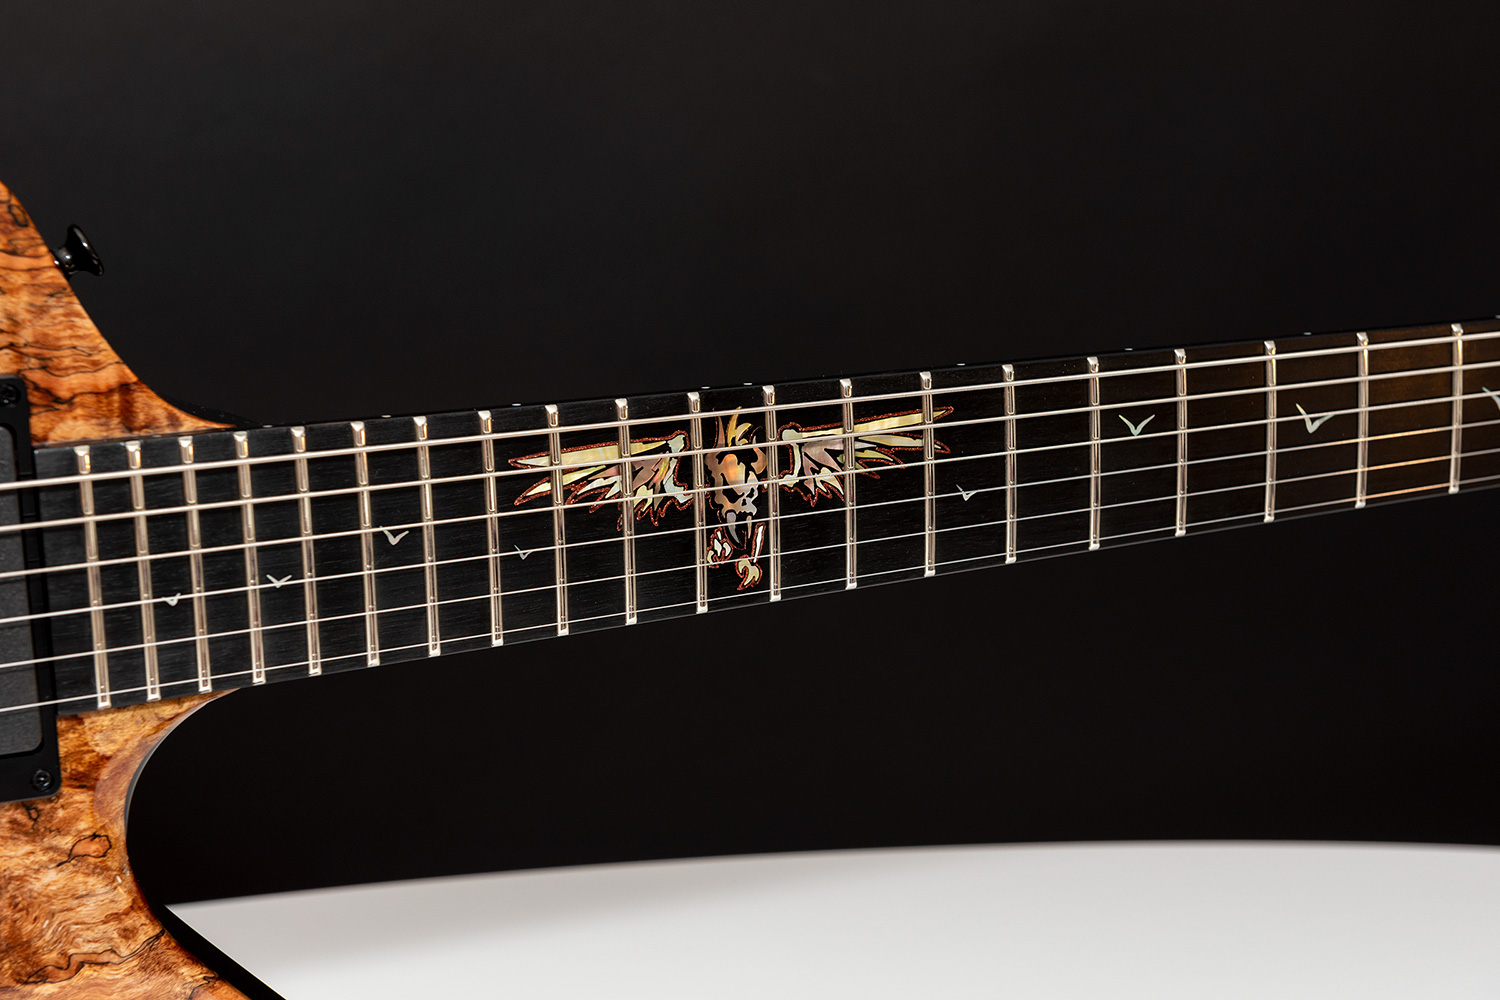 This guitar is called "Vulturus" and is a tribute to Metallica band